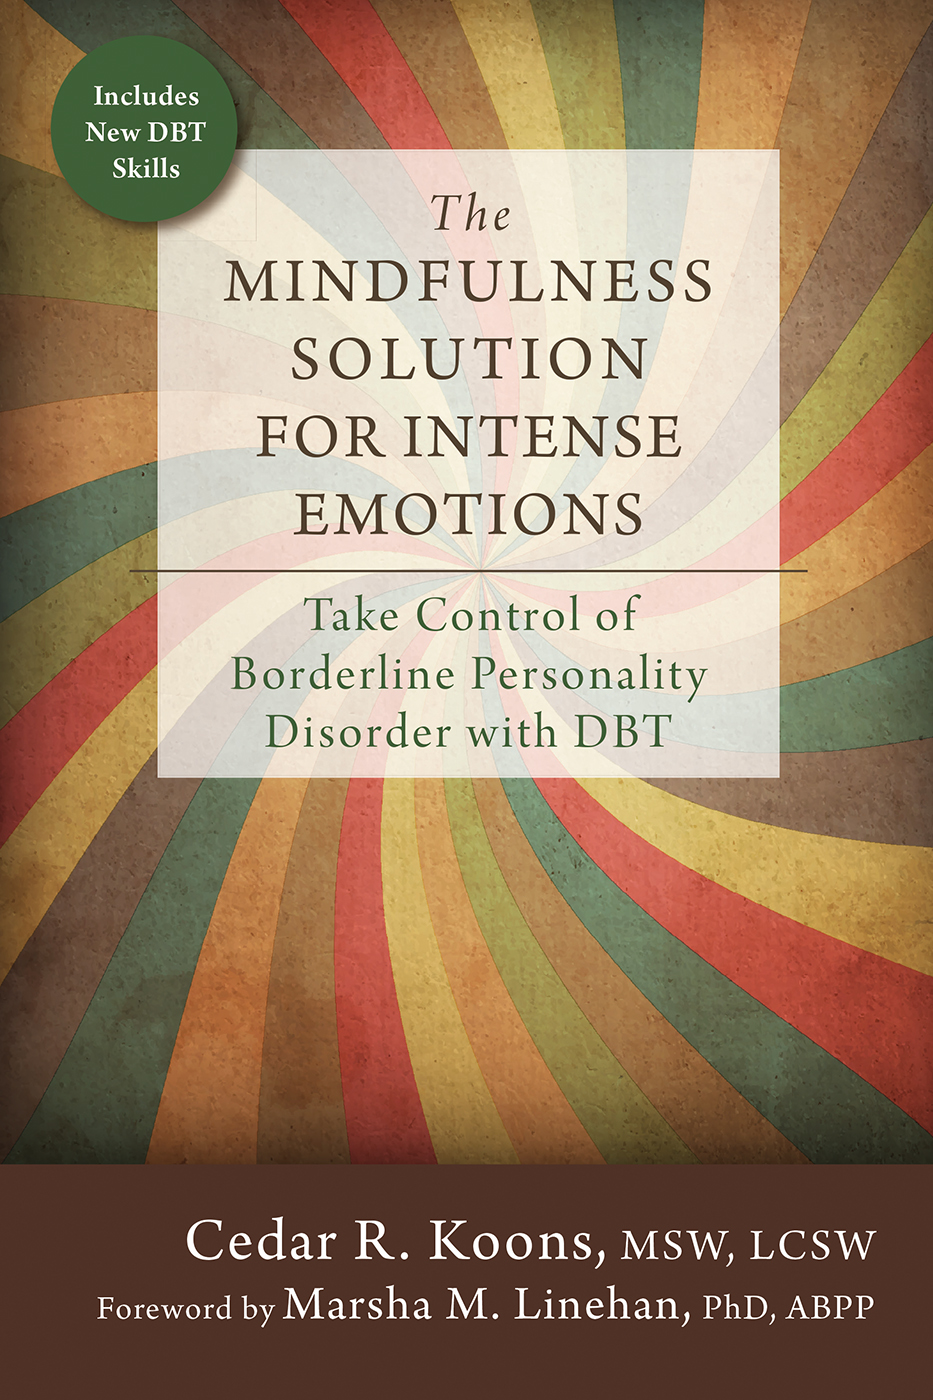 Image de couverture de The Mindfulness Solution for Intense Emotions [electronic resource] : Take Control of Borderline Personality Disorder with DBT